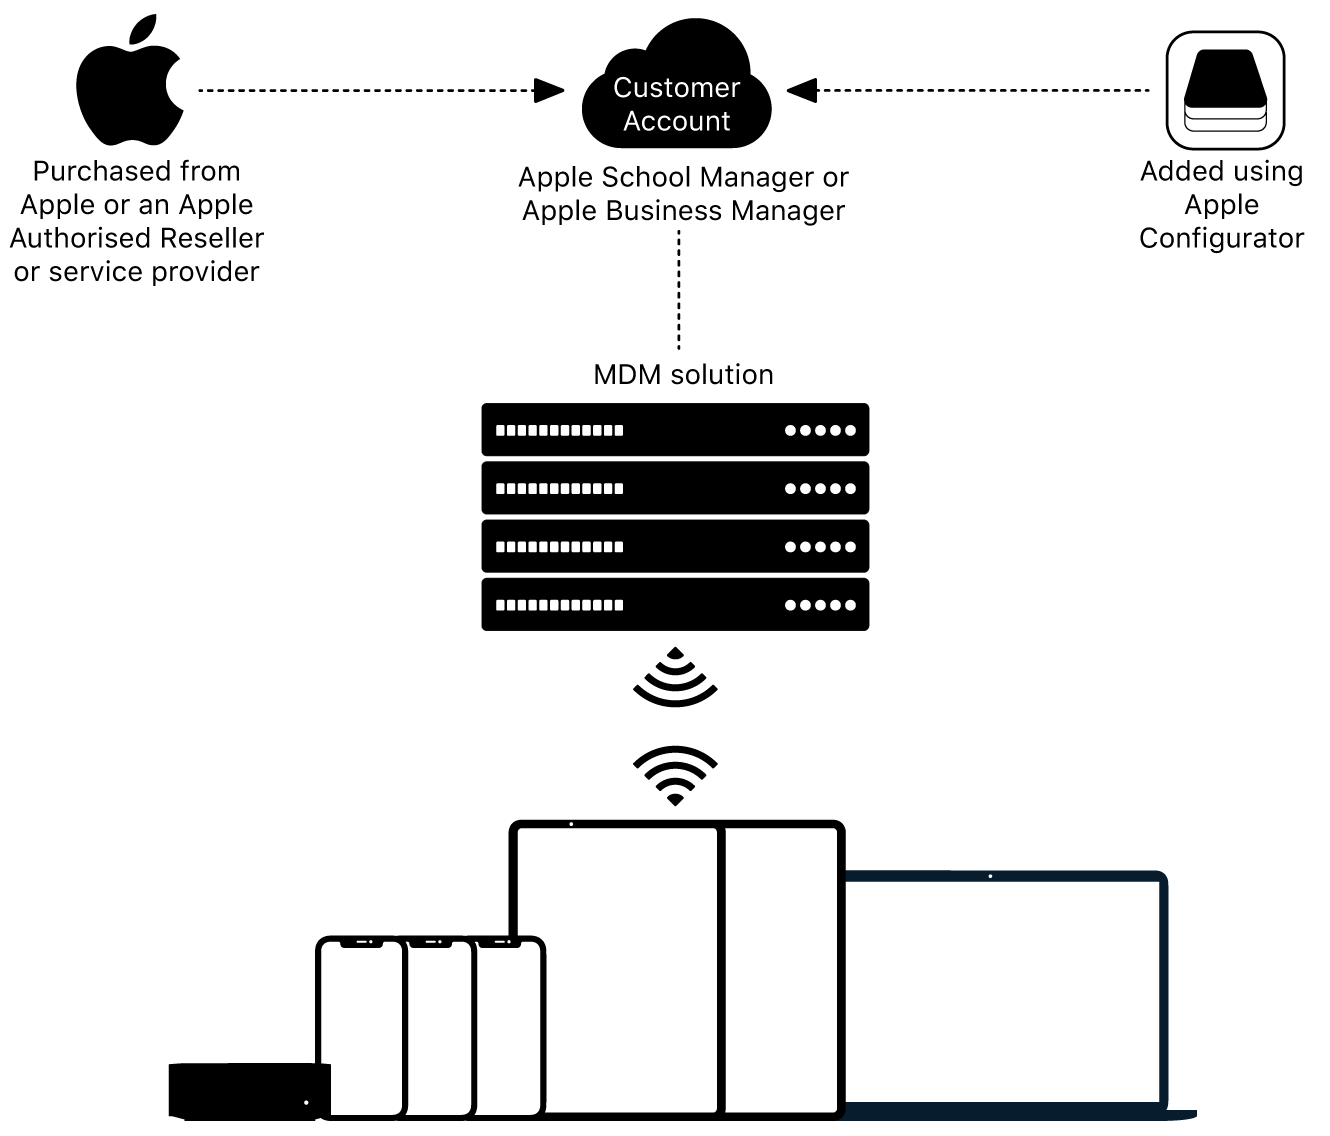 A diagram showing how devices are assigned to Apple School Manager or Apple Business Manager.